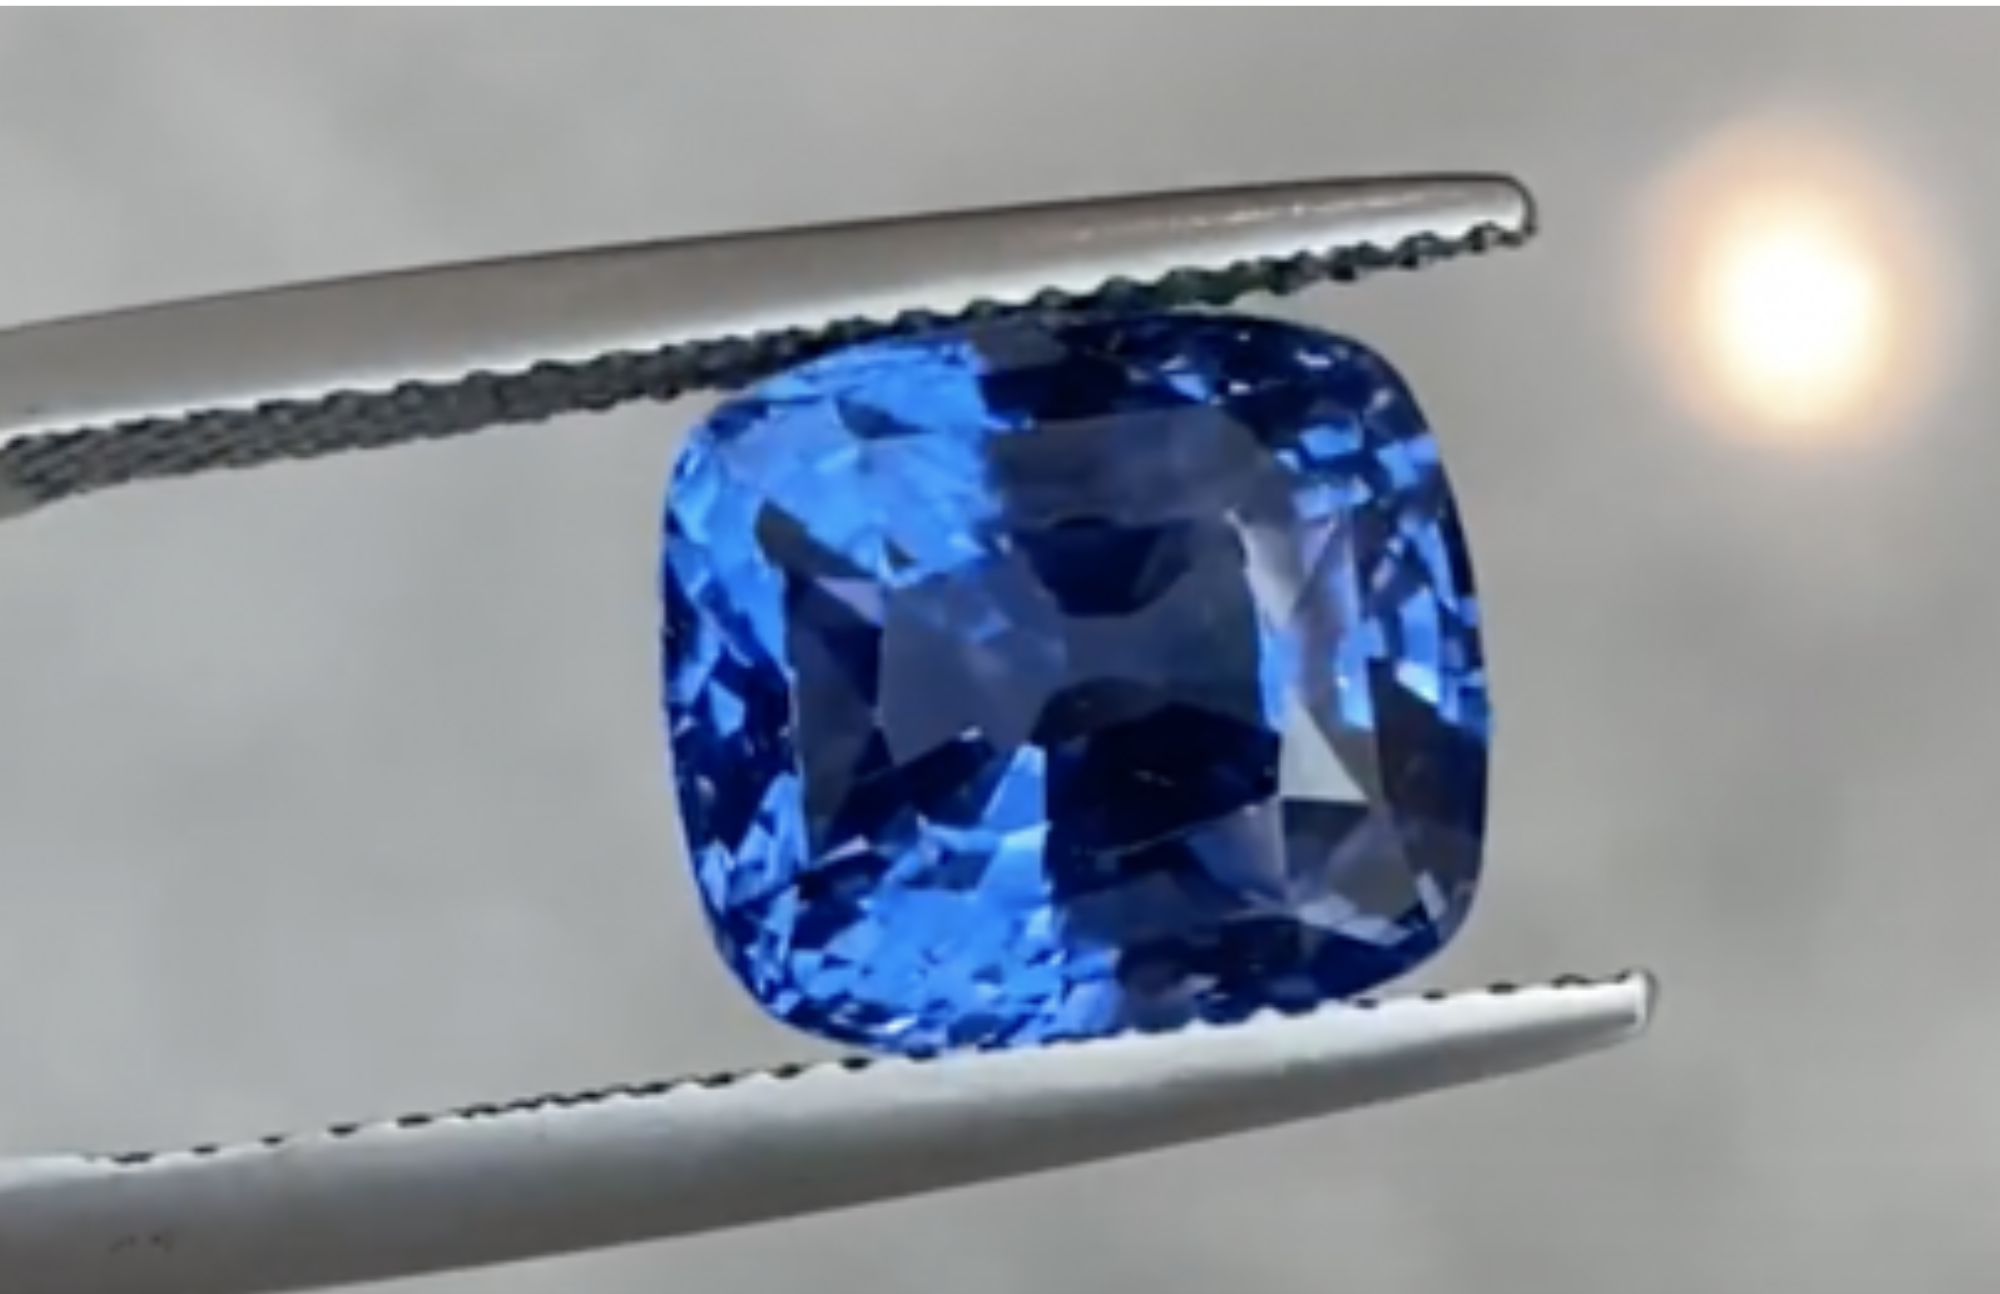 A blue rectangularp-shaped sapphire held by a prong